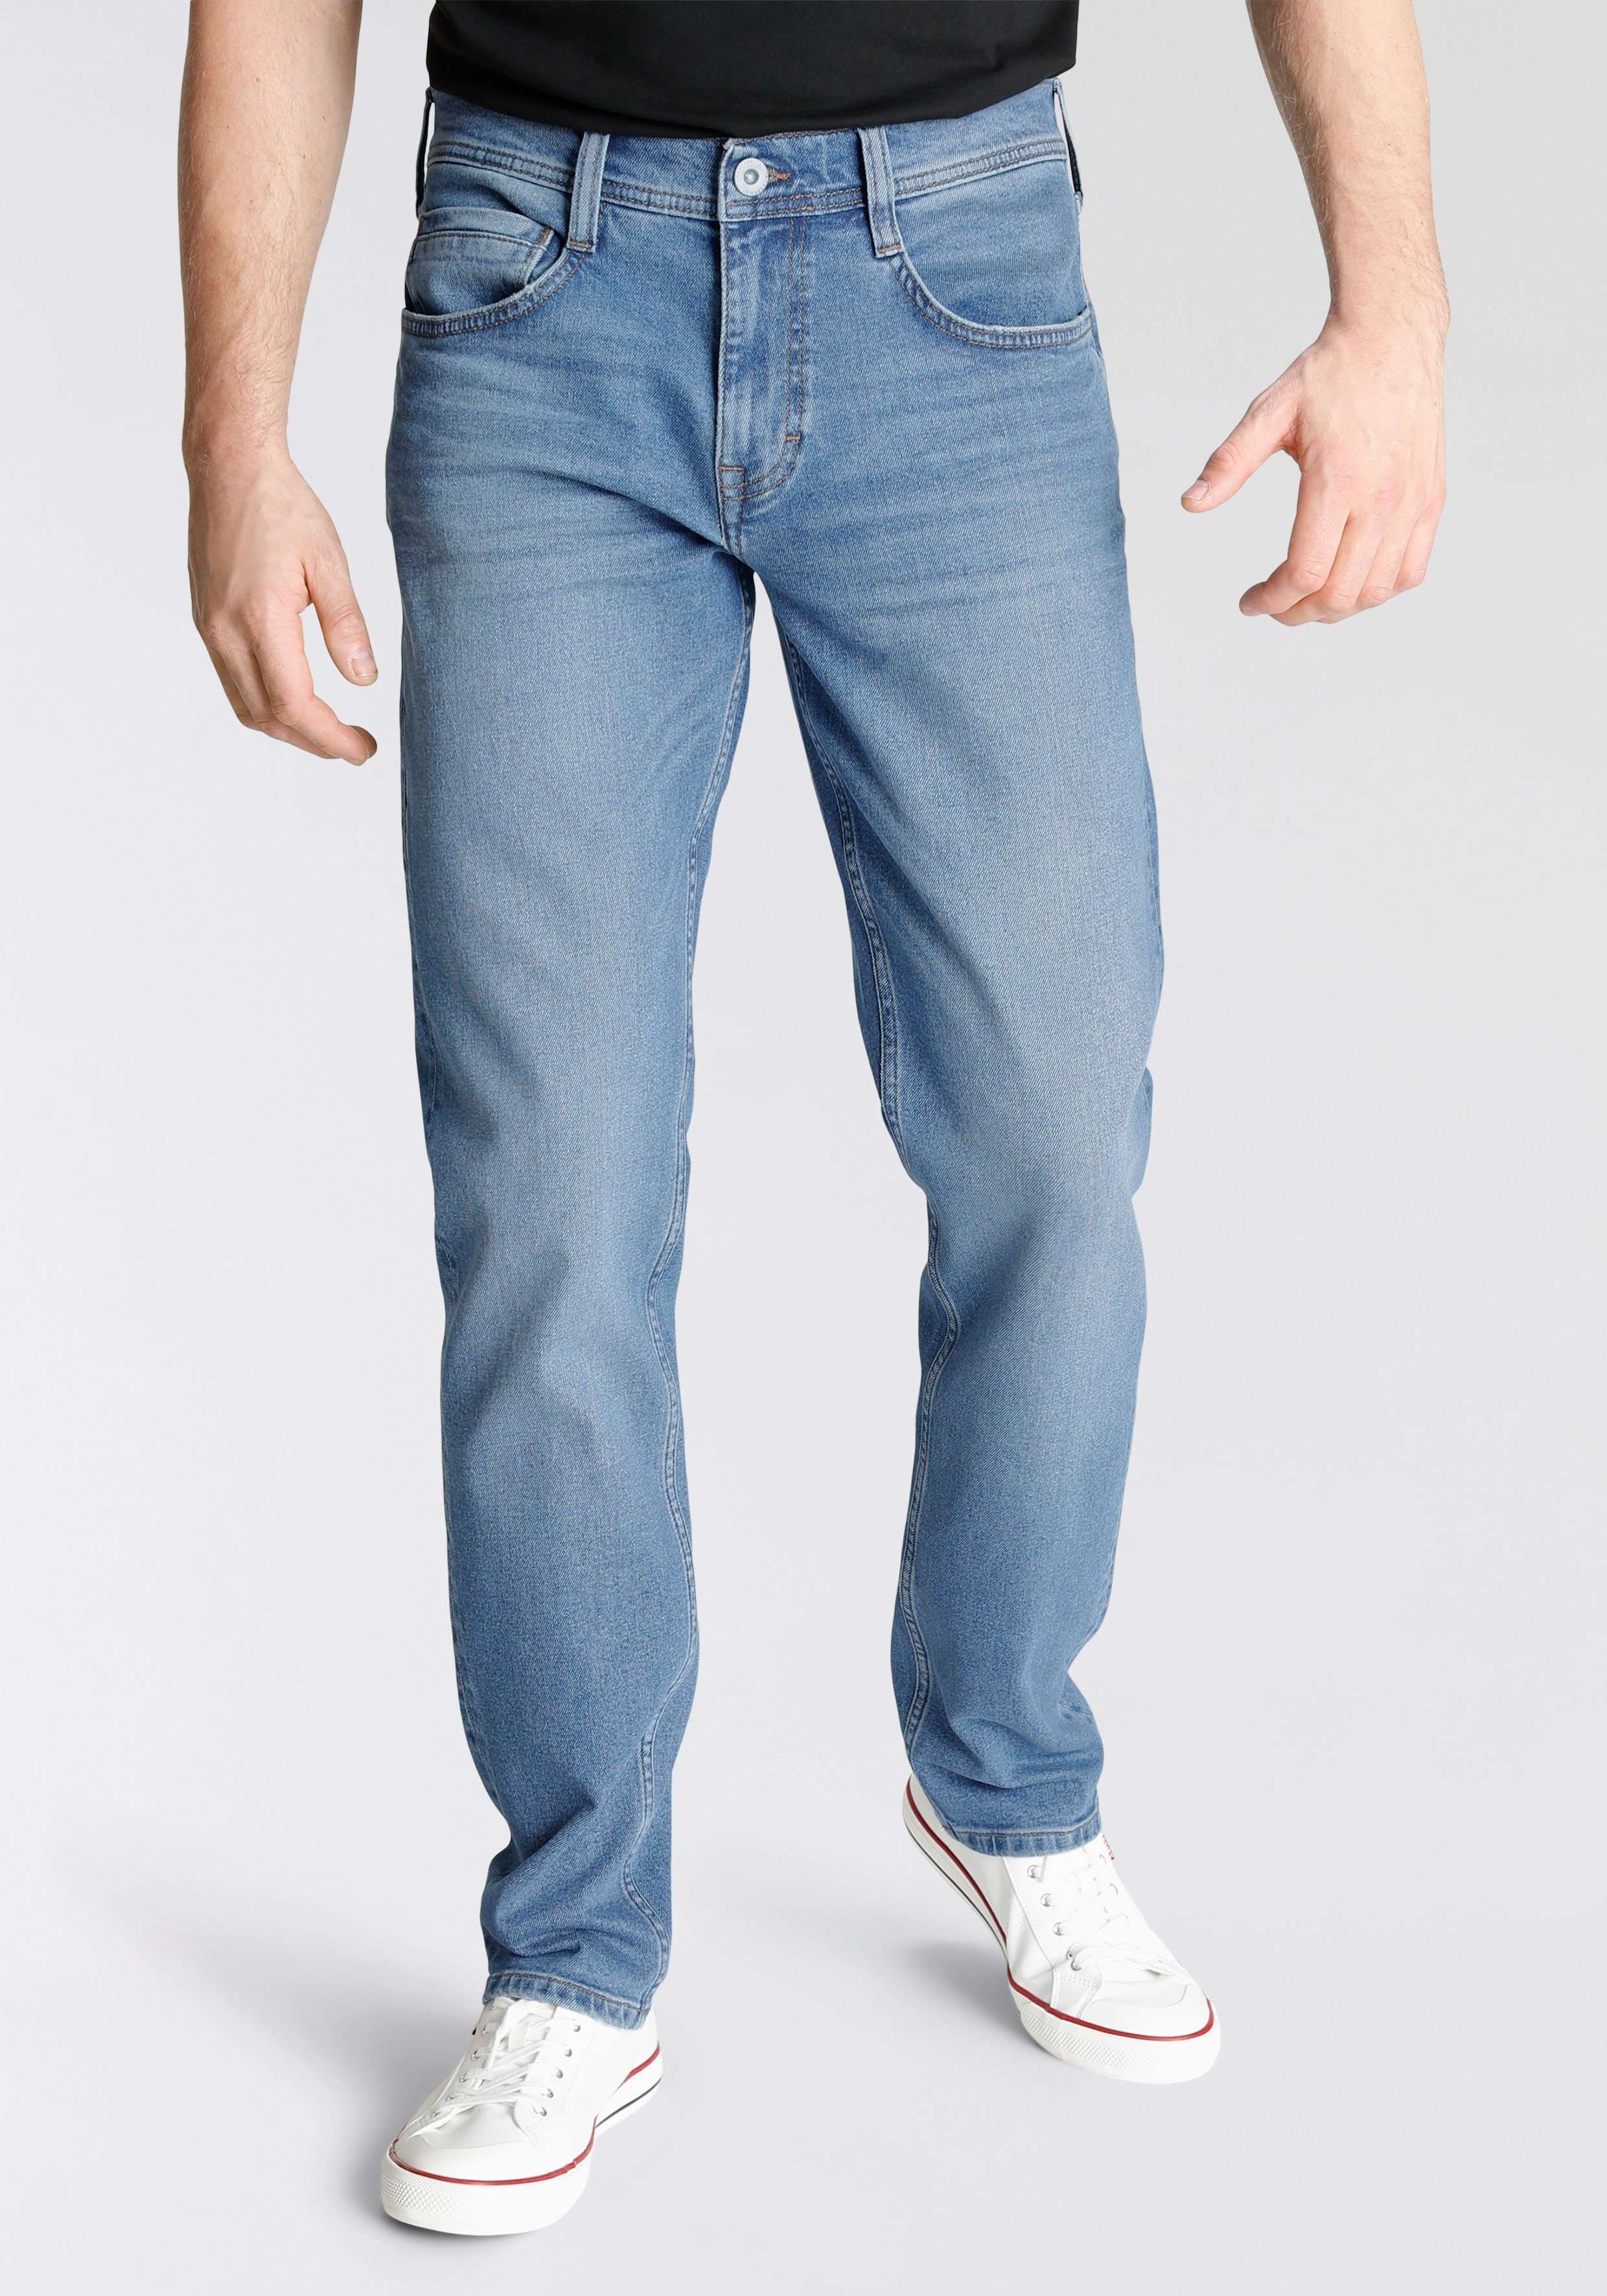 Denver Style medium MUSTANG Straight-Jeans blue washed